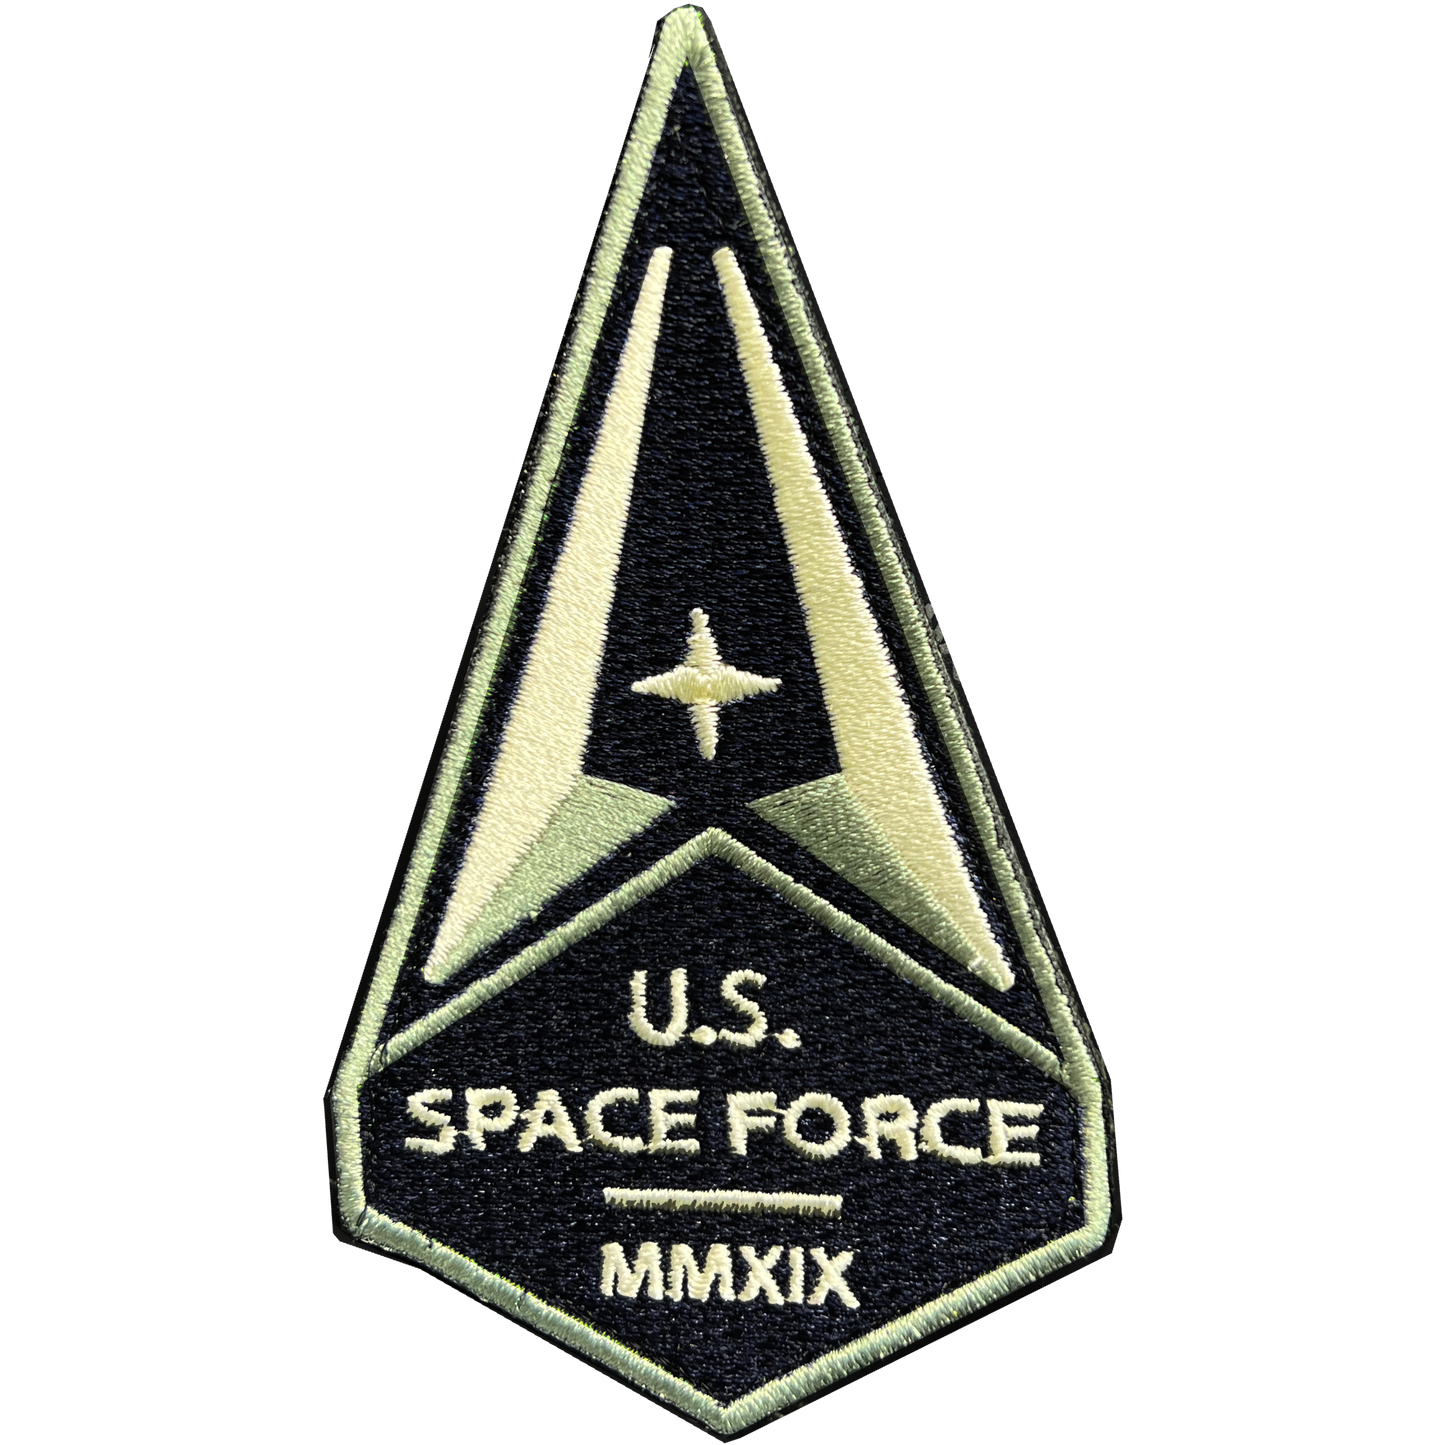 CL8-17 UNITED STATES Space Force USAF AIR FORCE MMXIX Embroidered uniform patch NASA SpaceX